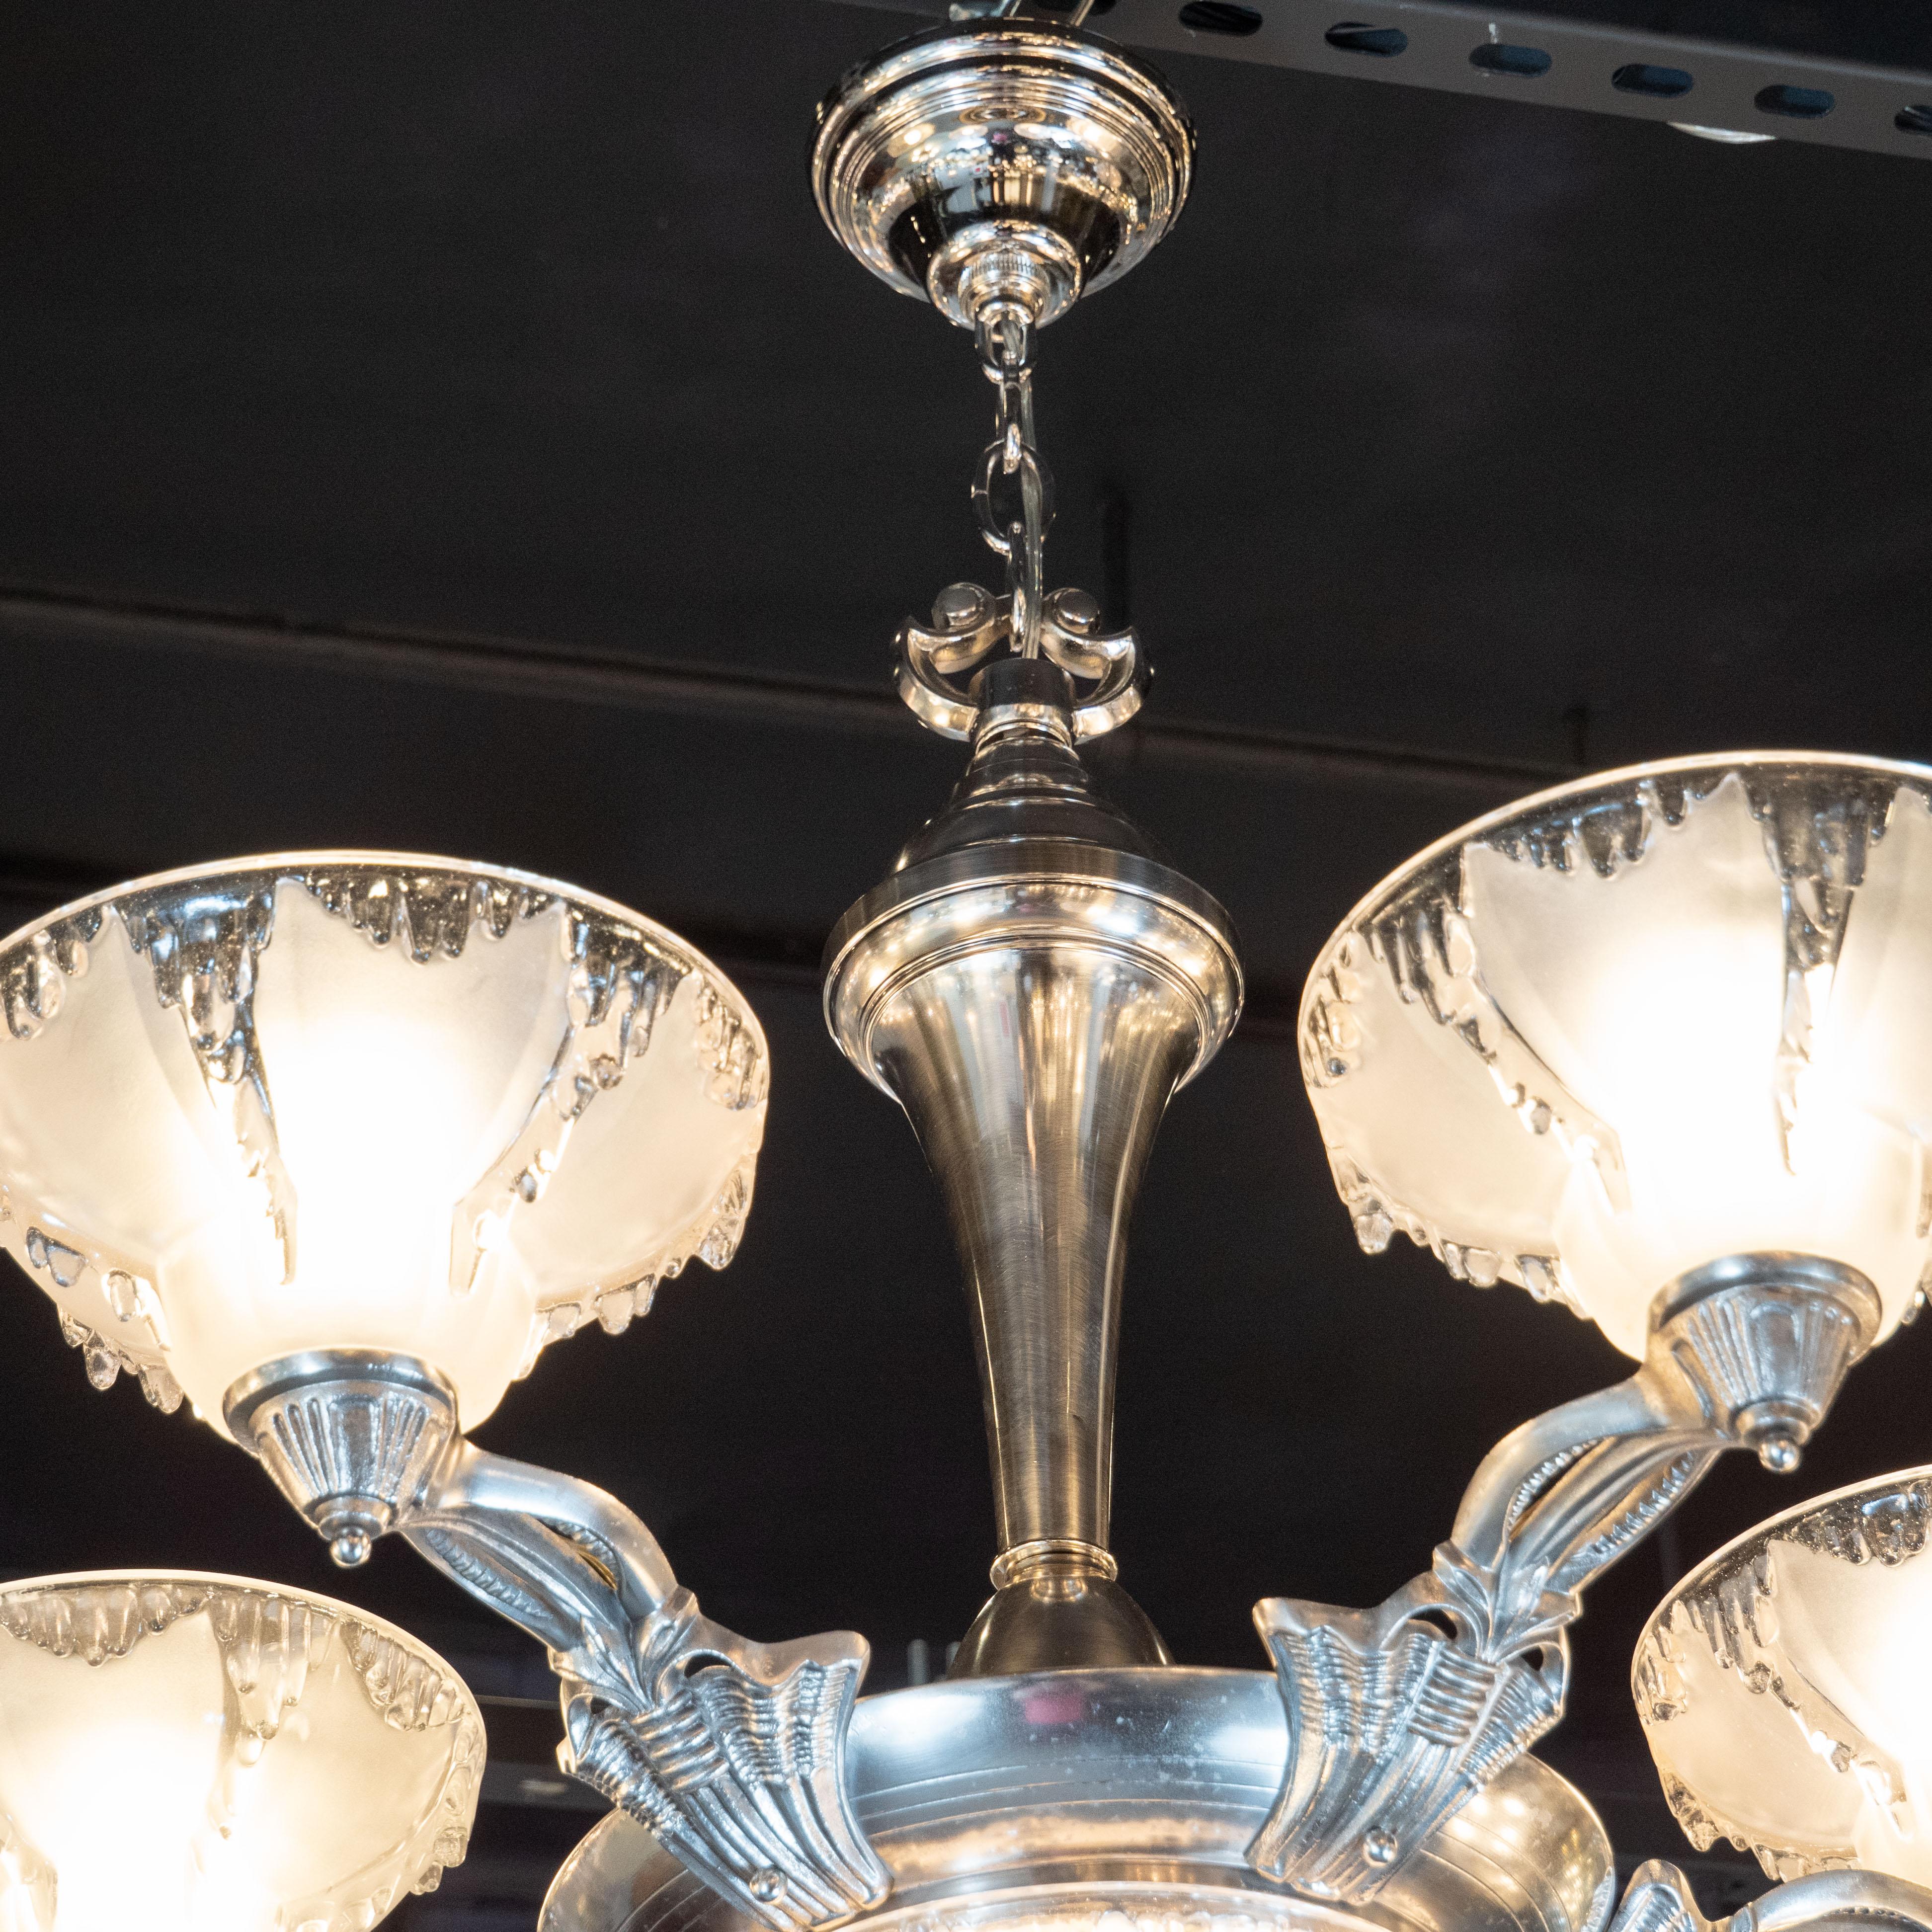 Blown Glass Art Deco Frosted Glass Chandelier with Silvered Bronze Fittings, Ezan & Petitot